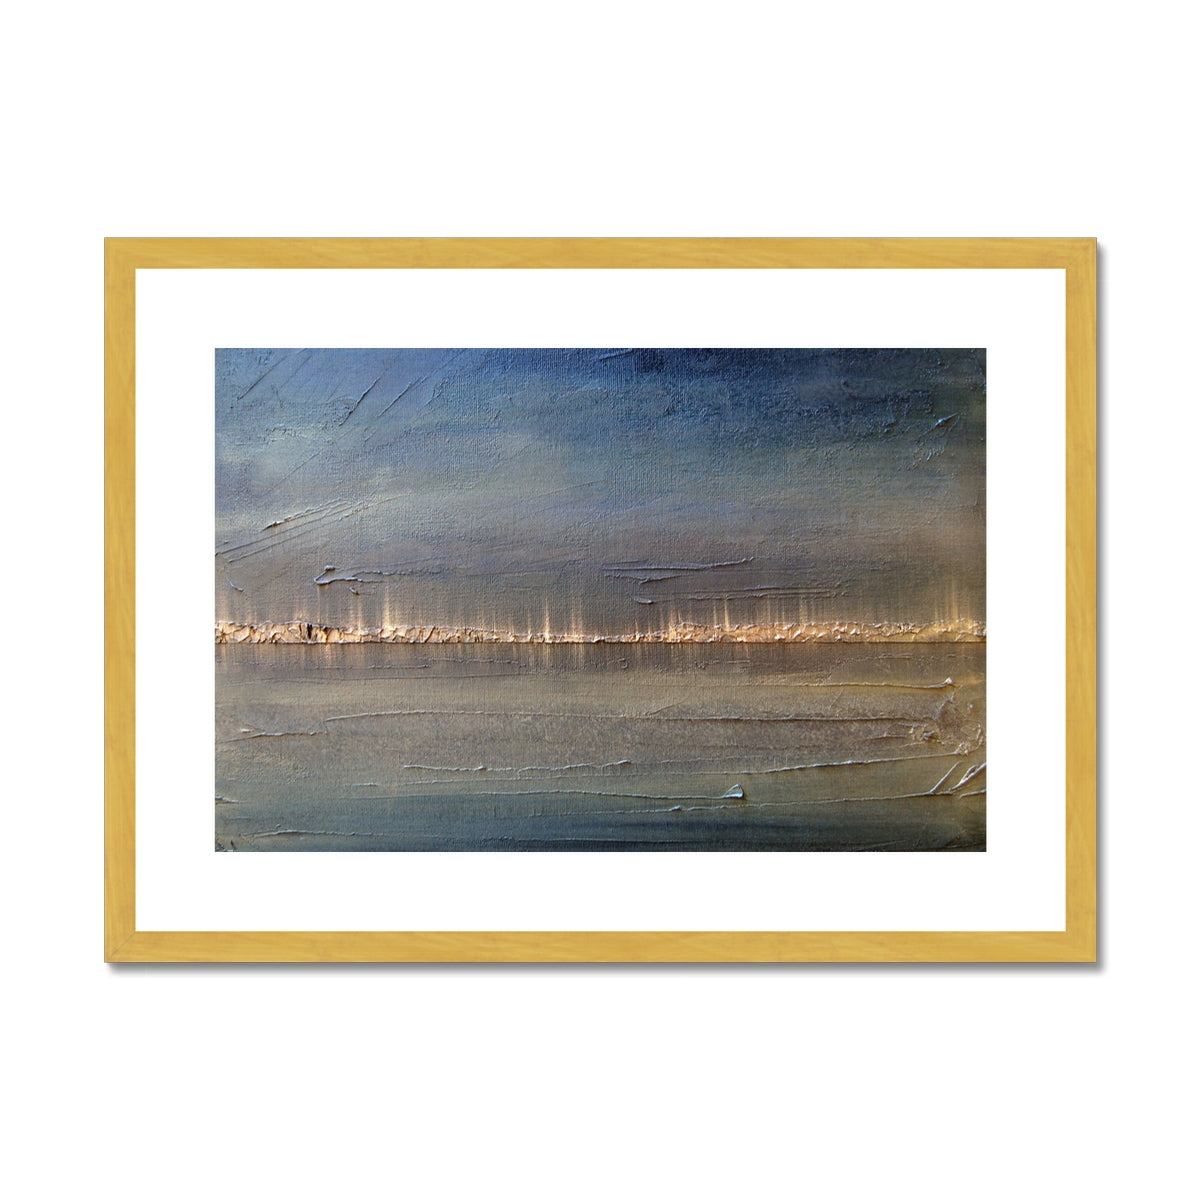 Distant Lights Lake Ontario Painting | Antique Framed & Mounted Prints From Scotland-Antique Framed & Mounted Prints-World Art Gallery-A2 Landscape-Gold Frame-Paintings, Prints, Homeware, Art Gifts From Scotland By Scottish Artist Kevin Hunter